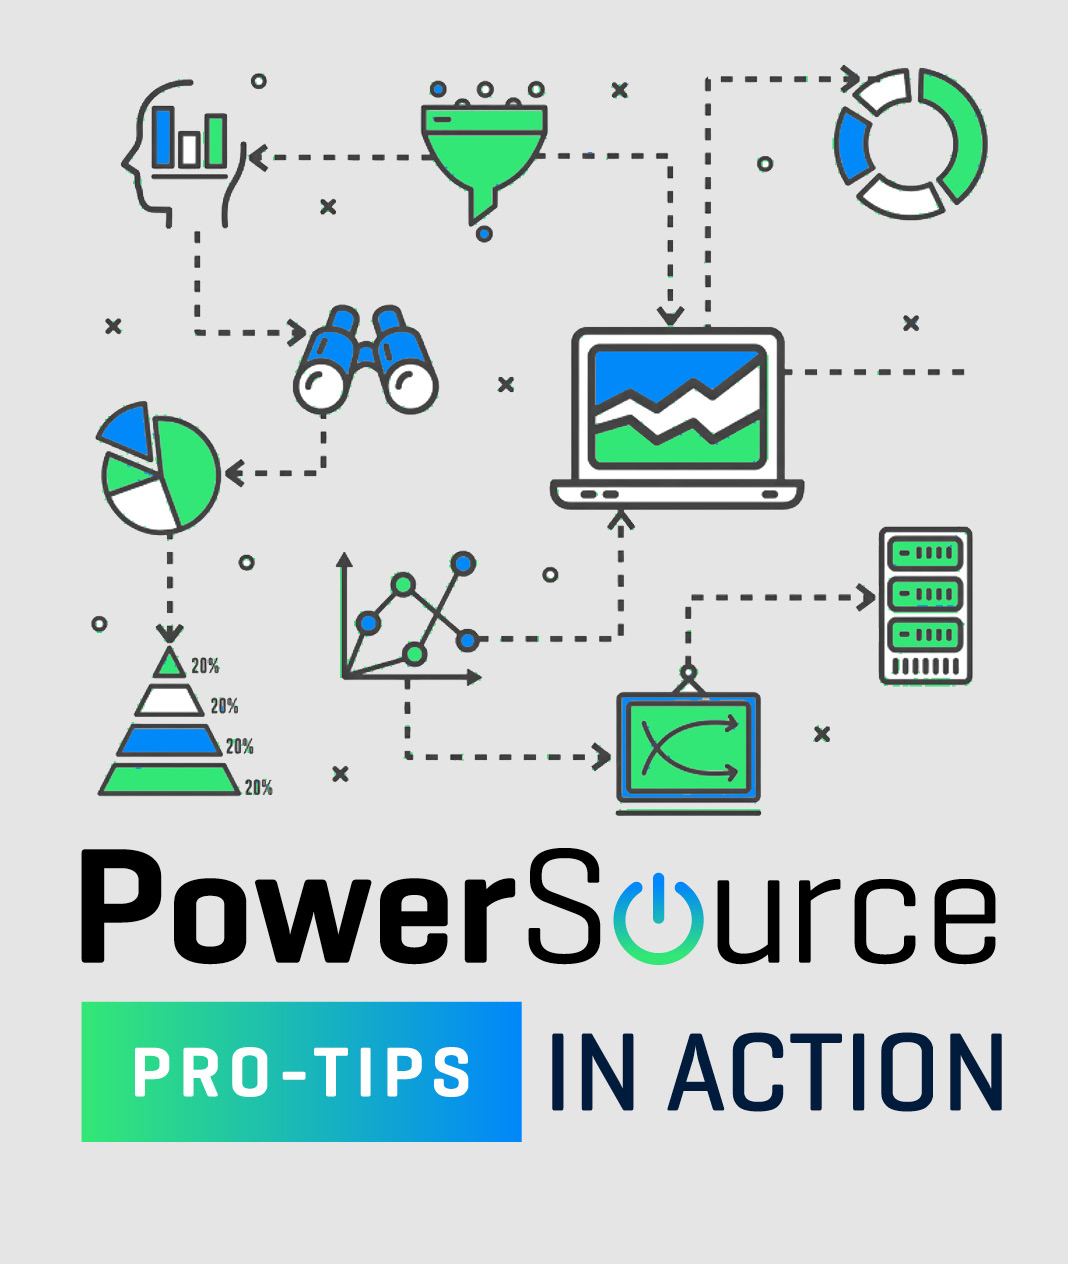 PowerSource Pro-Tips in Action